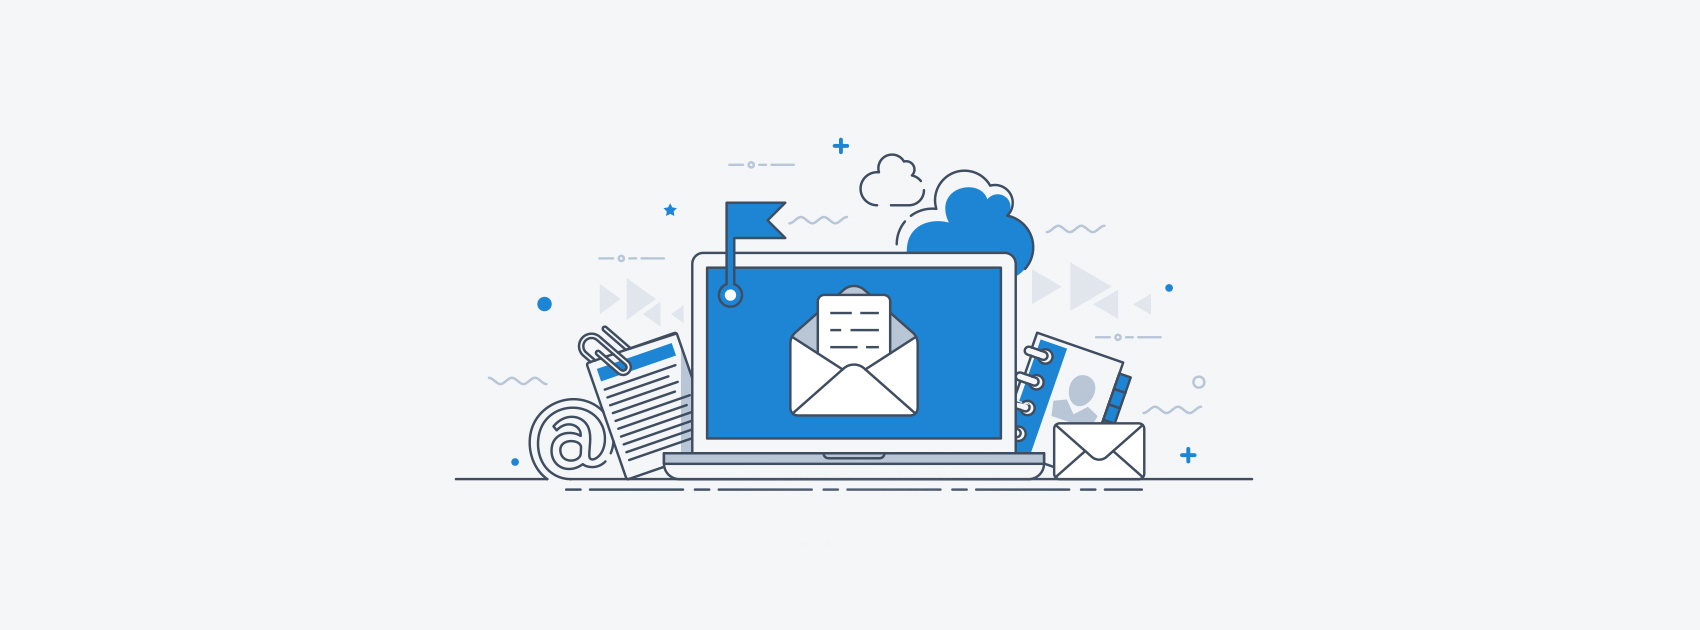 Email Marketing Facts,Email Marketing Facts 2018,Interesting Email Marketing Facts,Email Marketing Strategy,Email Marketing Tools,Unknown Facts About Email Marketing,Email Marketing Tips,Best Startups in India 2018,Latest Startup News India,startup stories